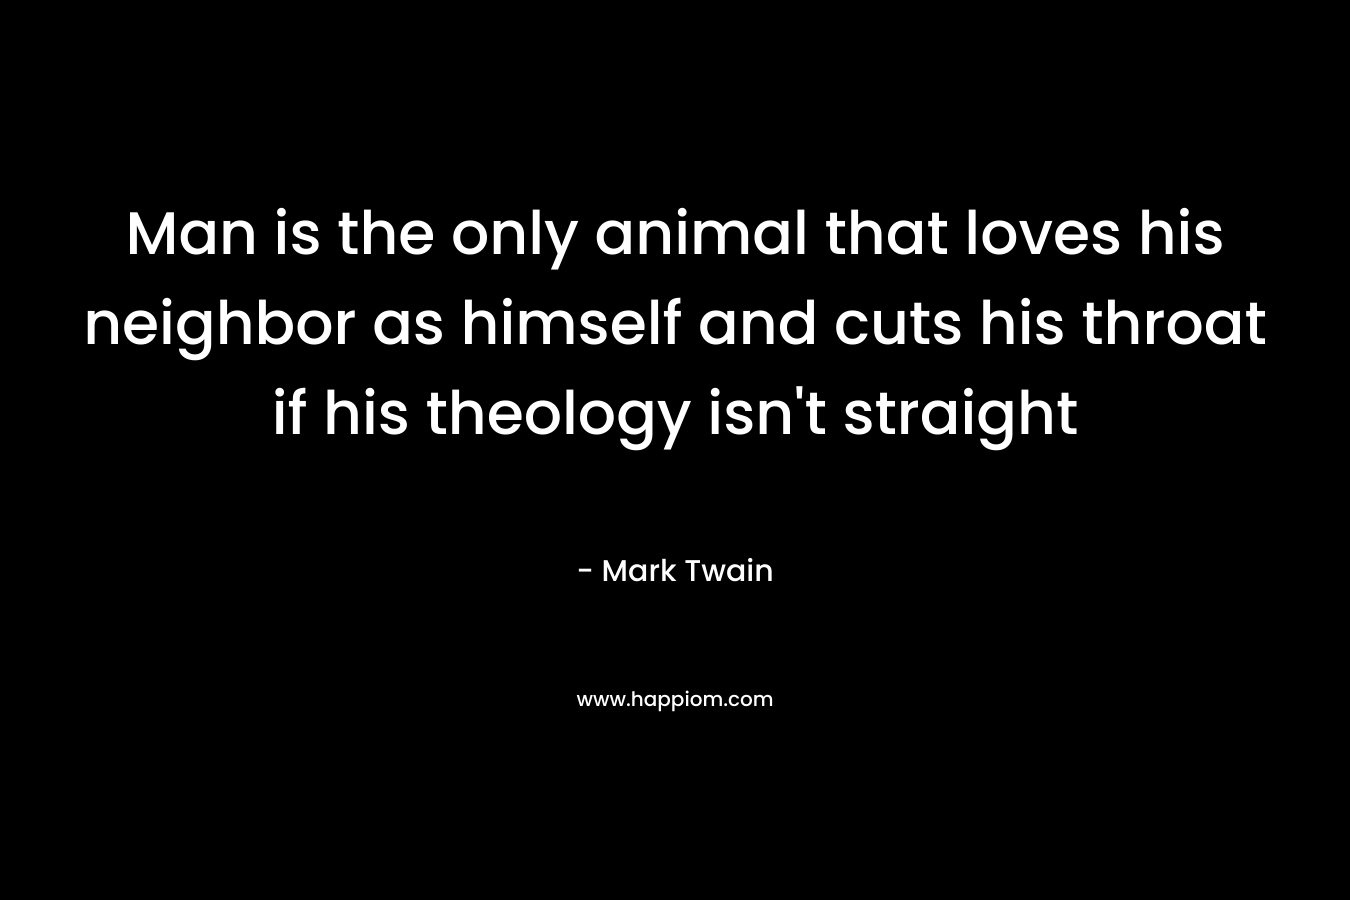 Man is the only animal that loves his neighbor as himself and cuts his throat if his theology isn’t straight – Mark Twain